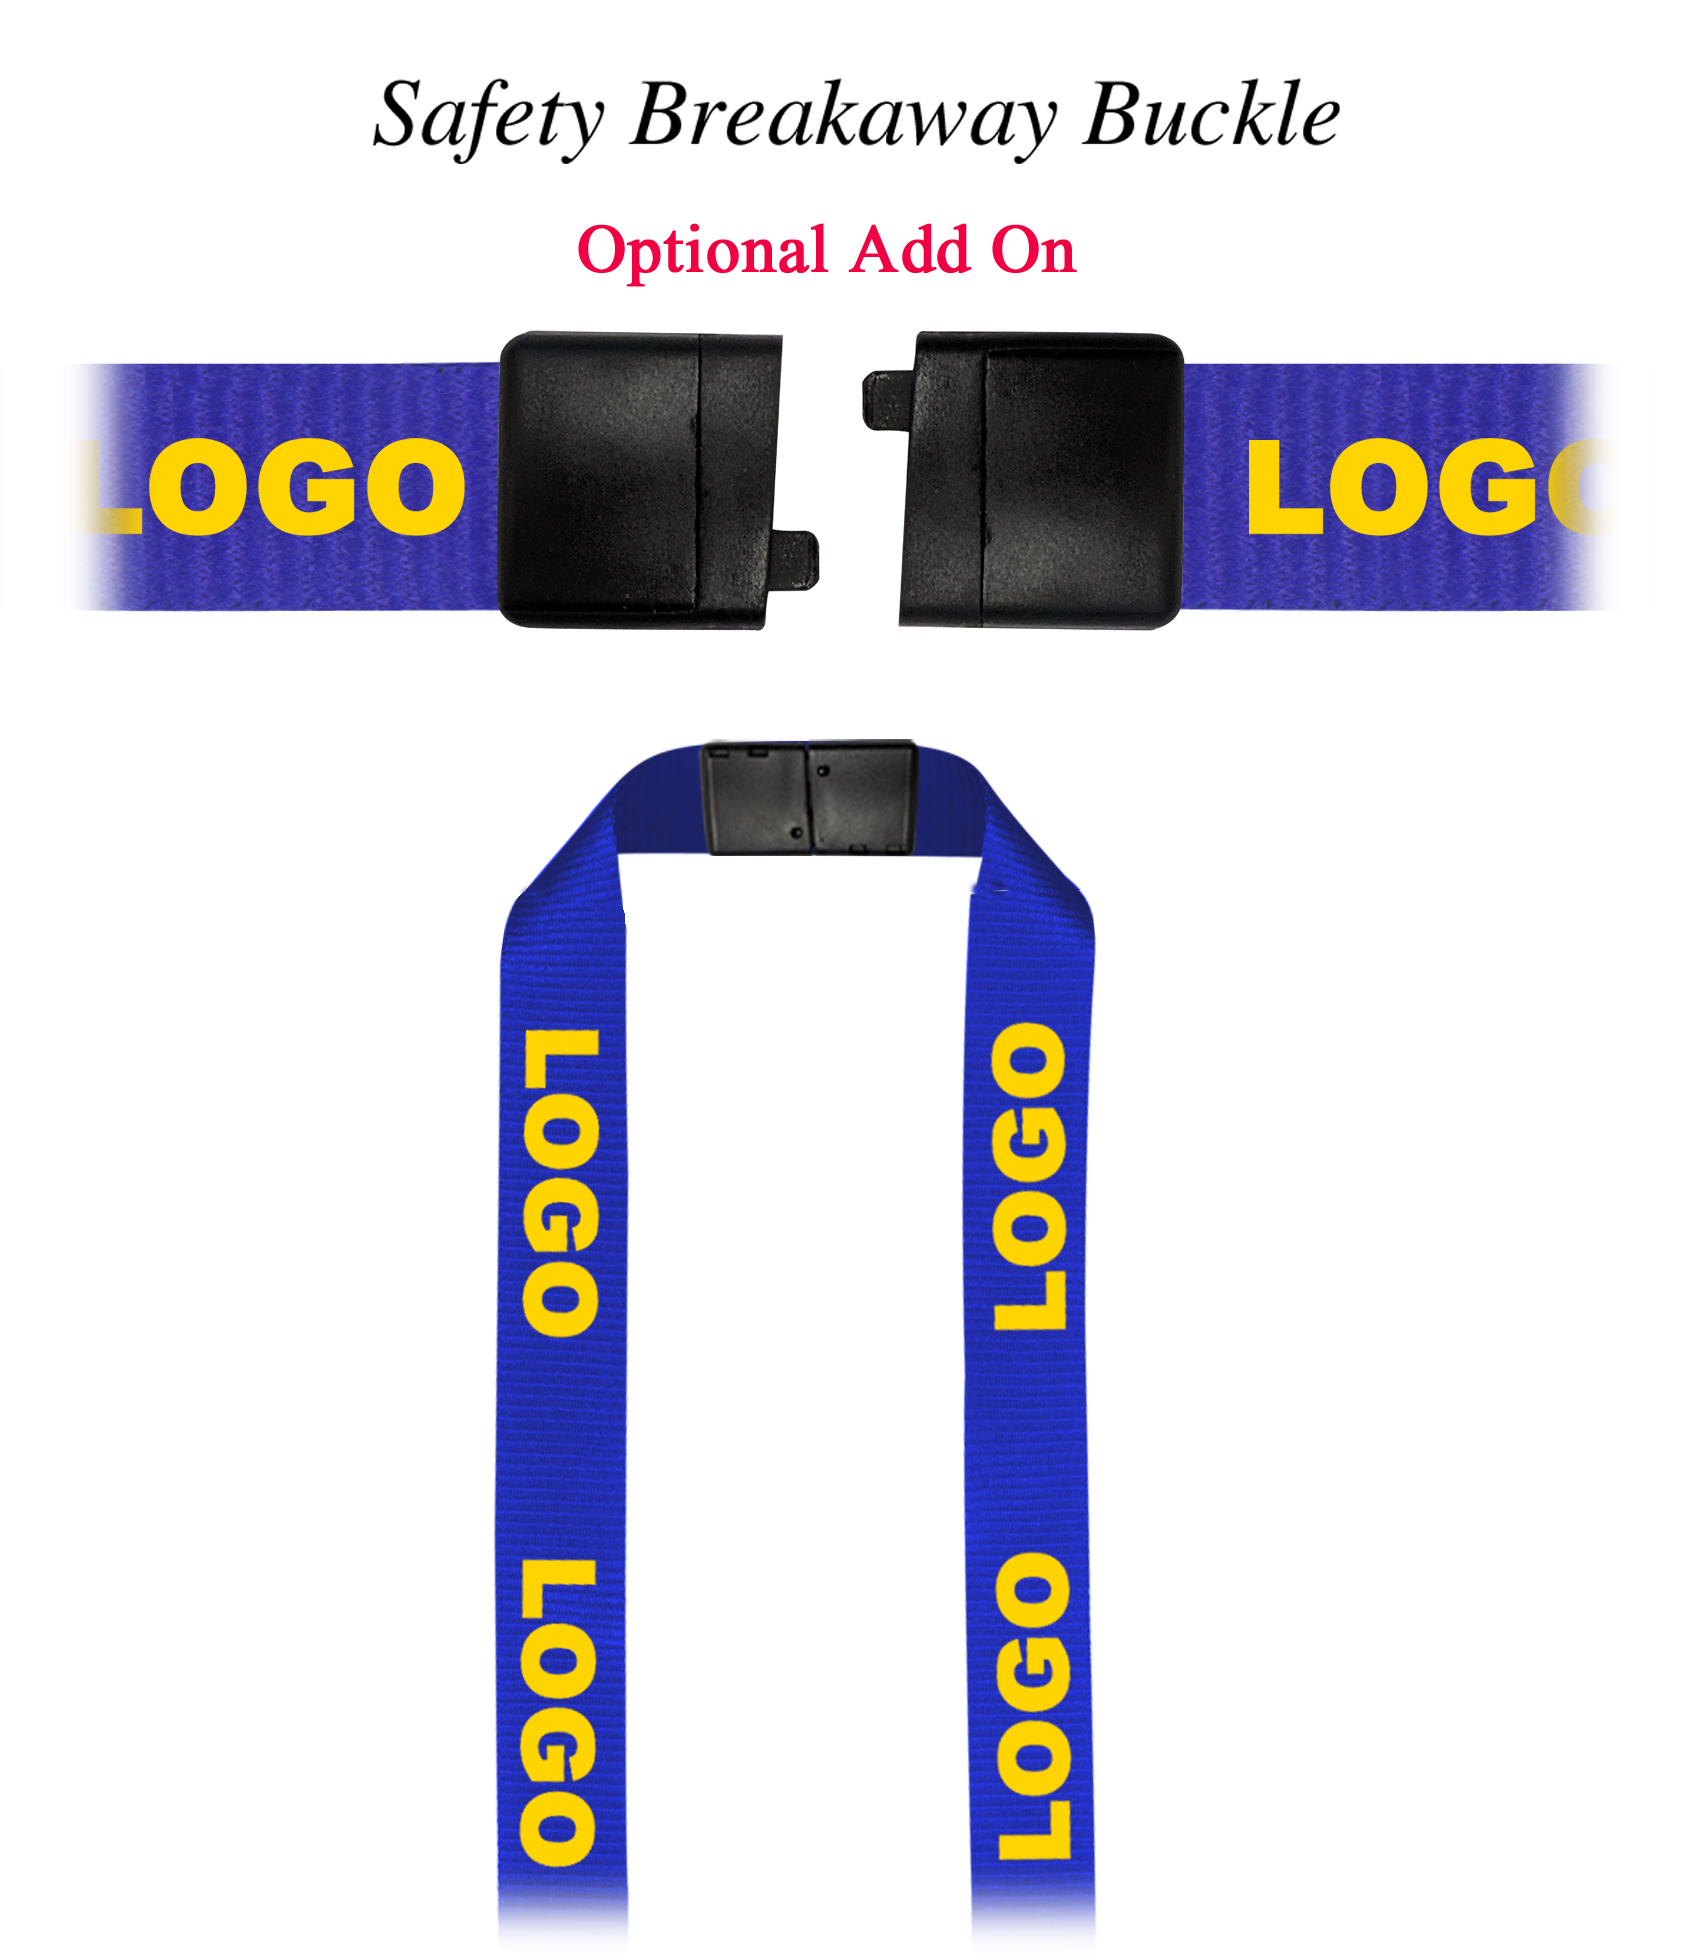 Customizable 5/8" Double-Ended Logo Lanyard with One-Color Print - Free Setup and Digital Proof Included!